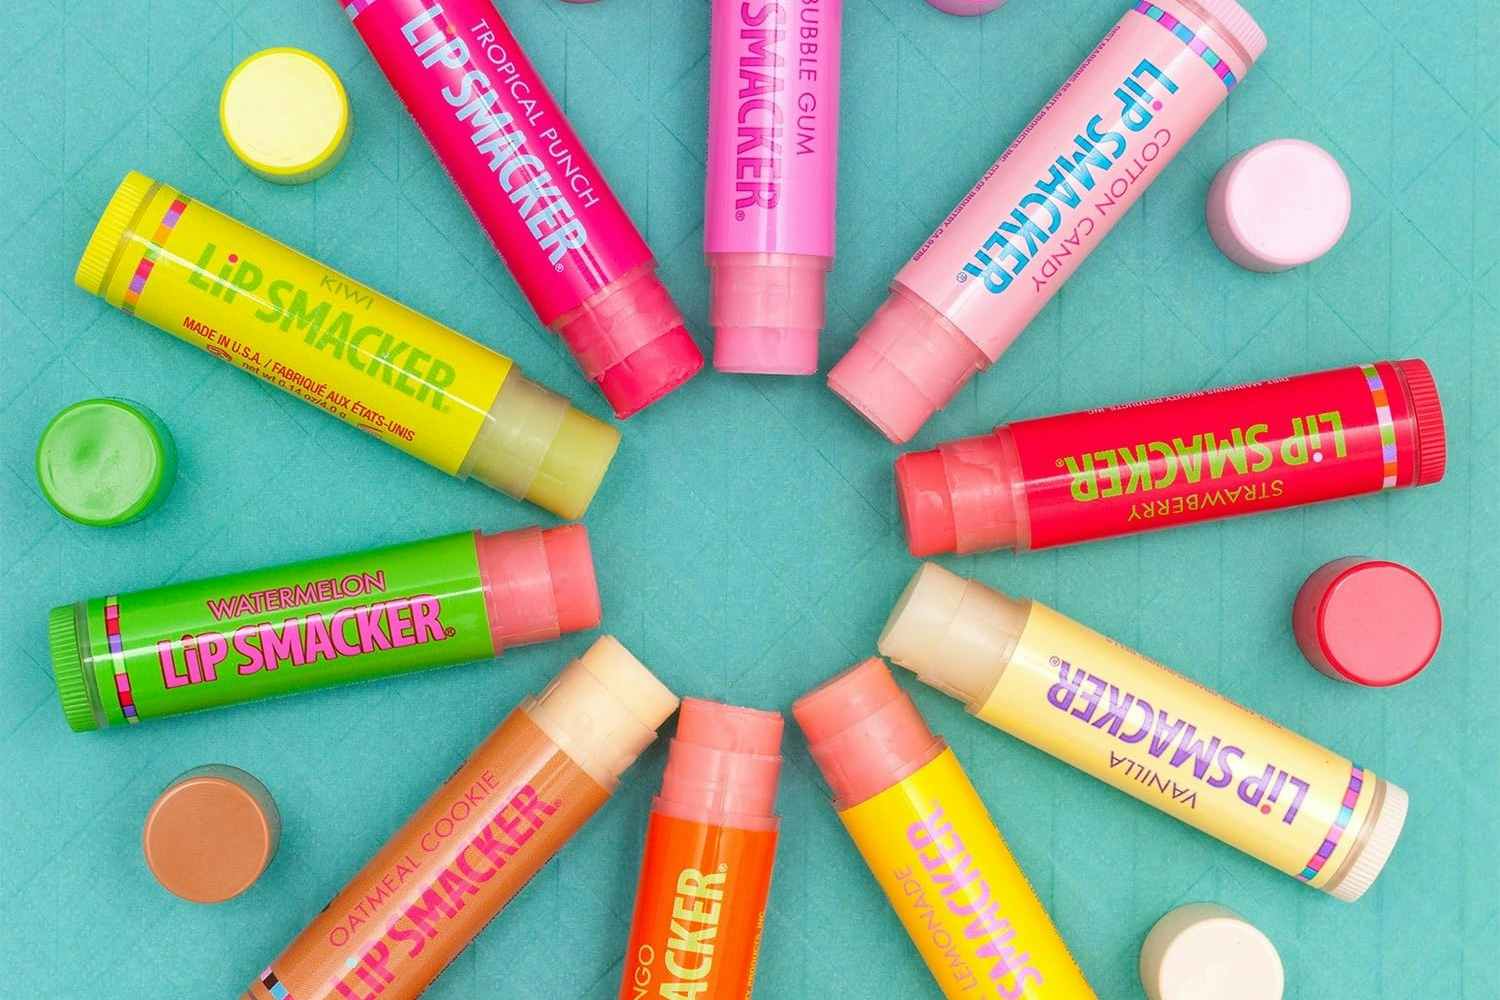 Lip Smacker Party Pack With 10 Lip Balms, as Low as $6 on Amazon